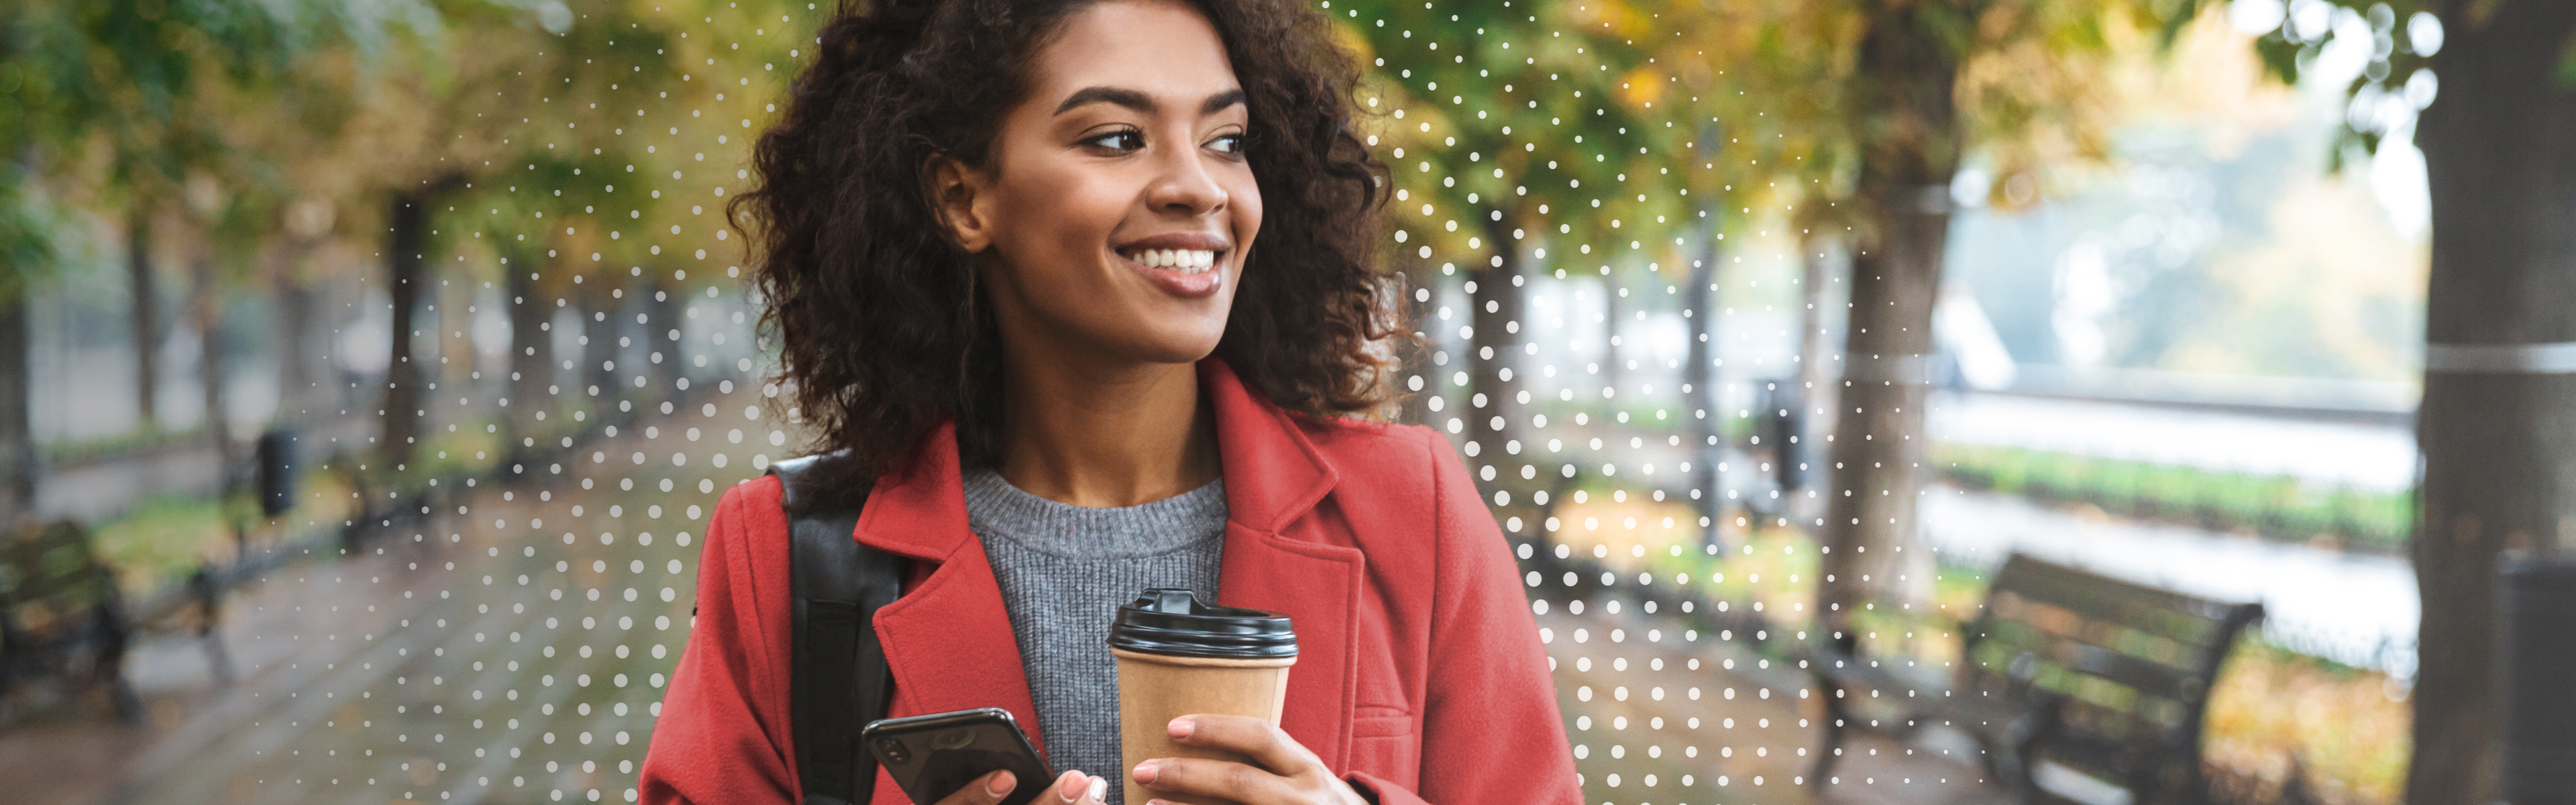 Smiling woman walks along a tree-lined street with phone and coffee in hand.